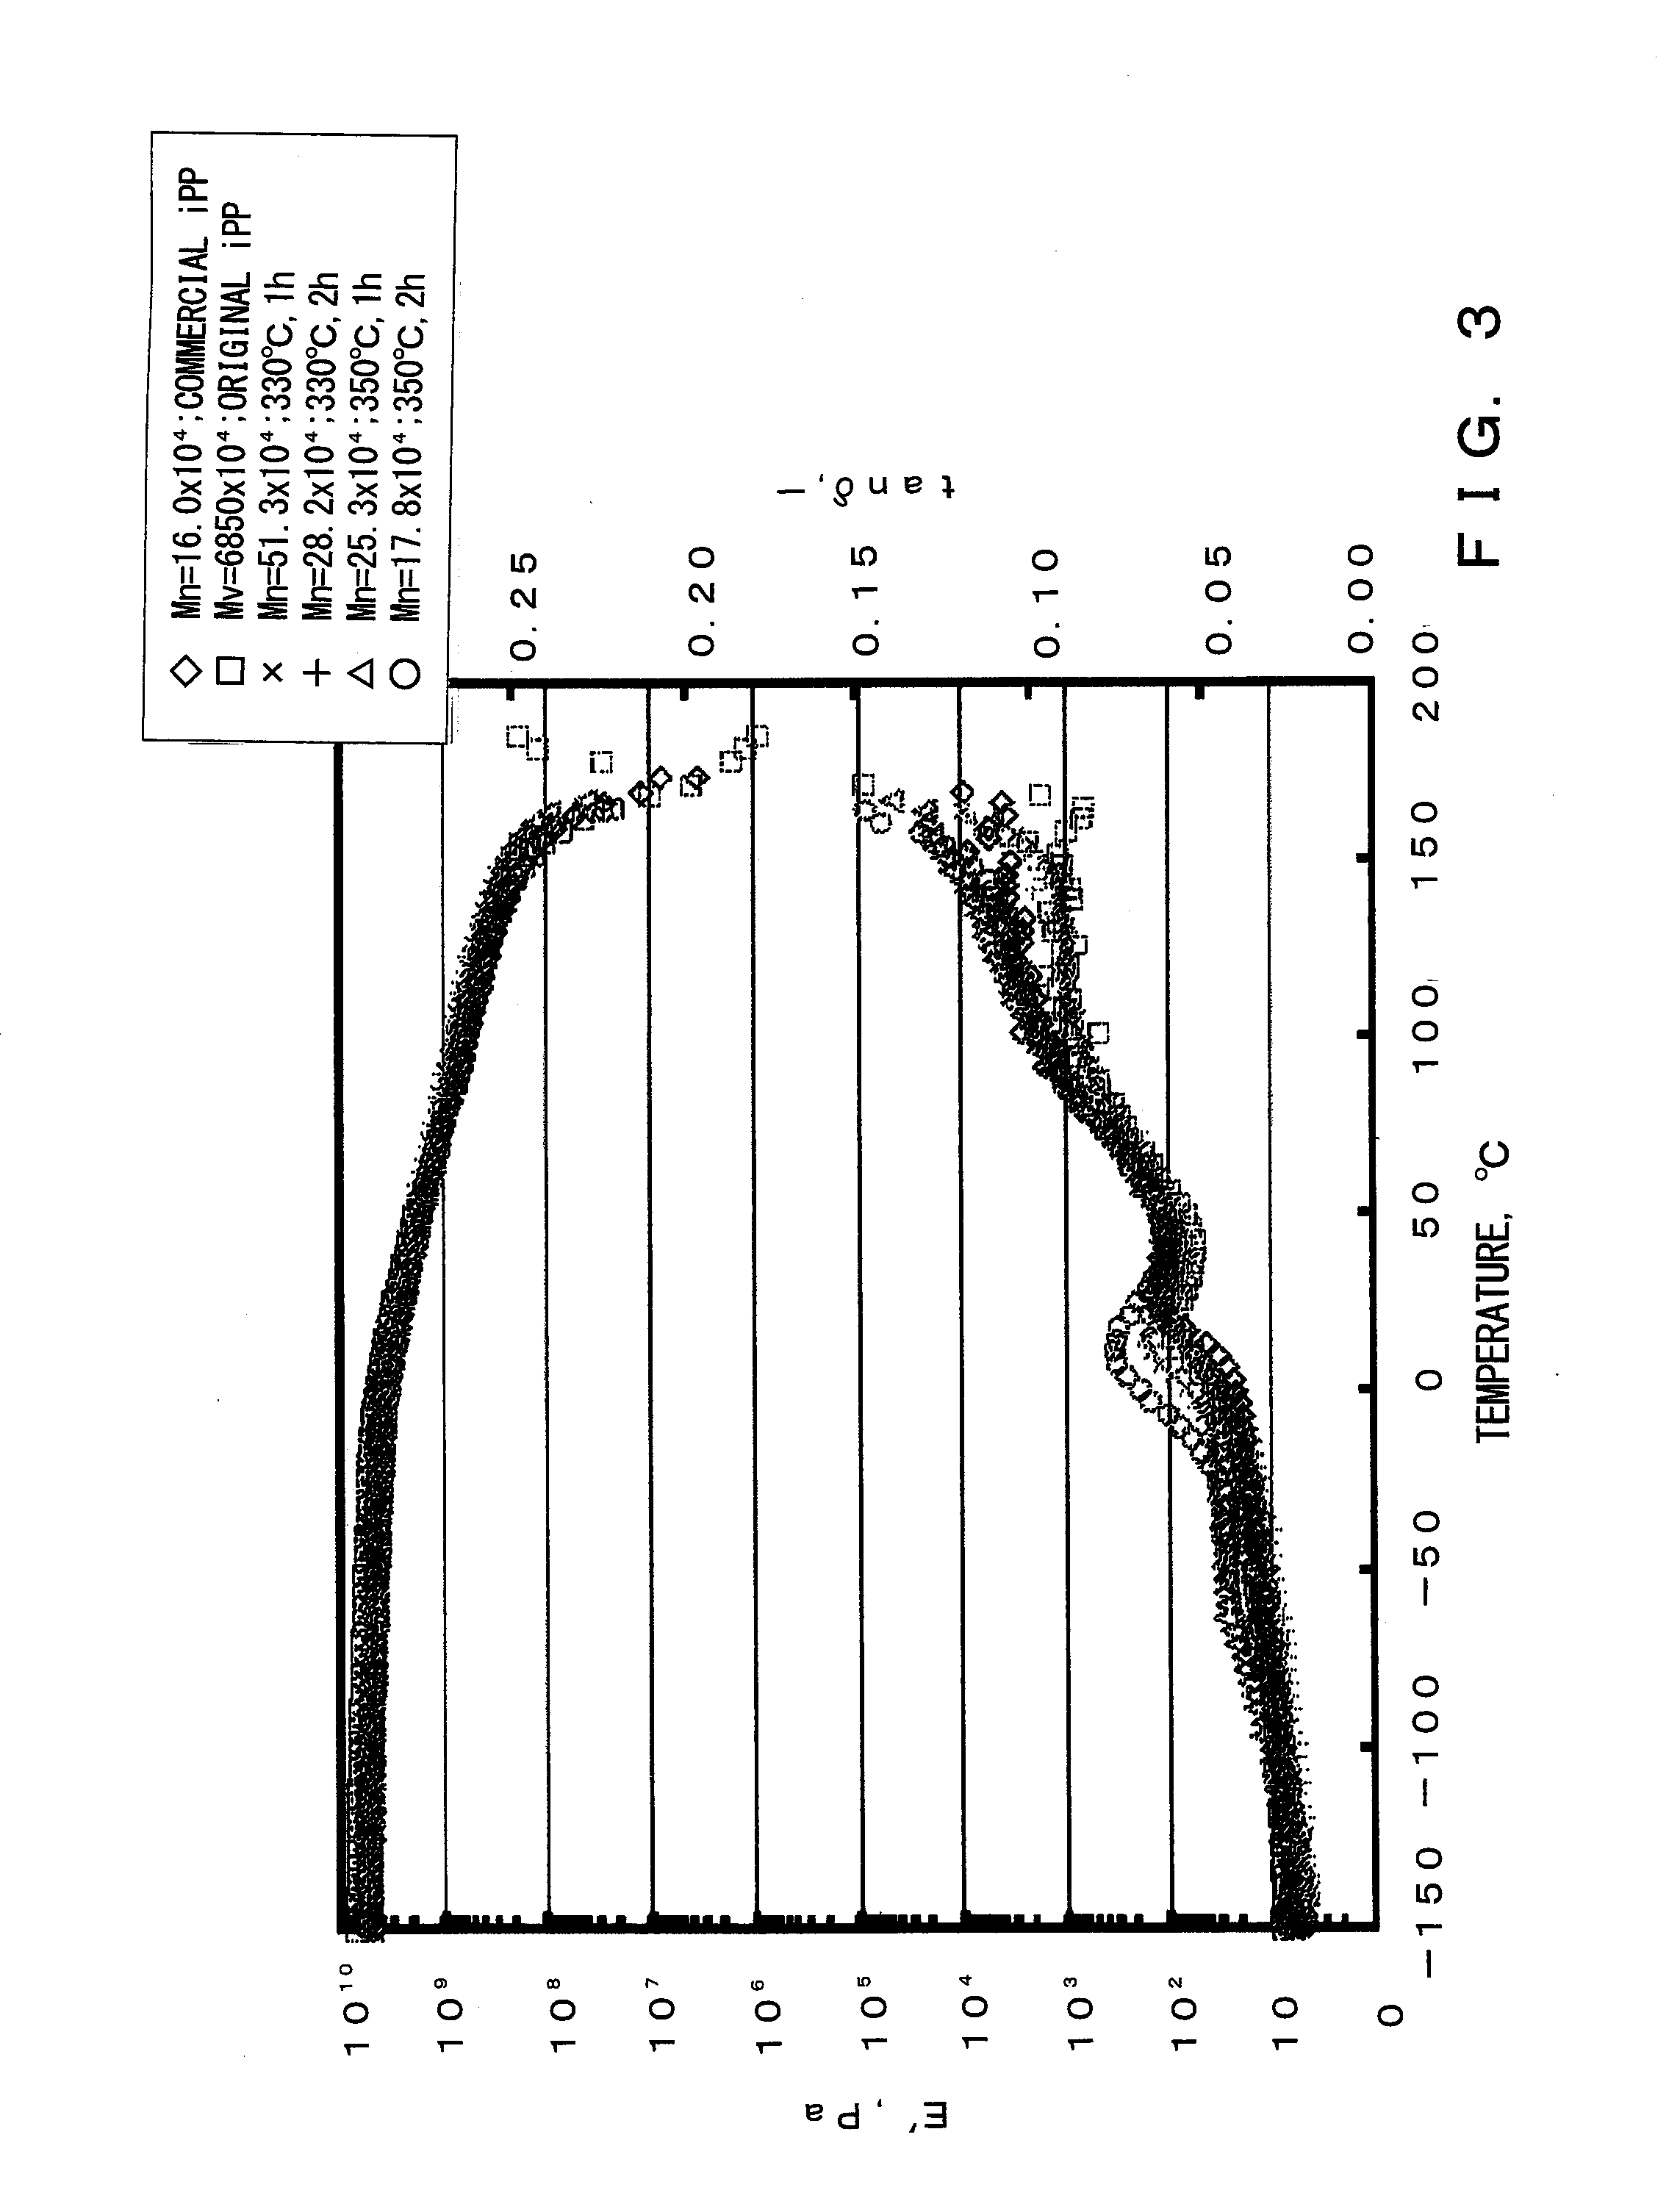 Polyolefin Having Terminal Double Bond and Method of Producing the Same